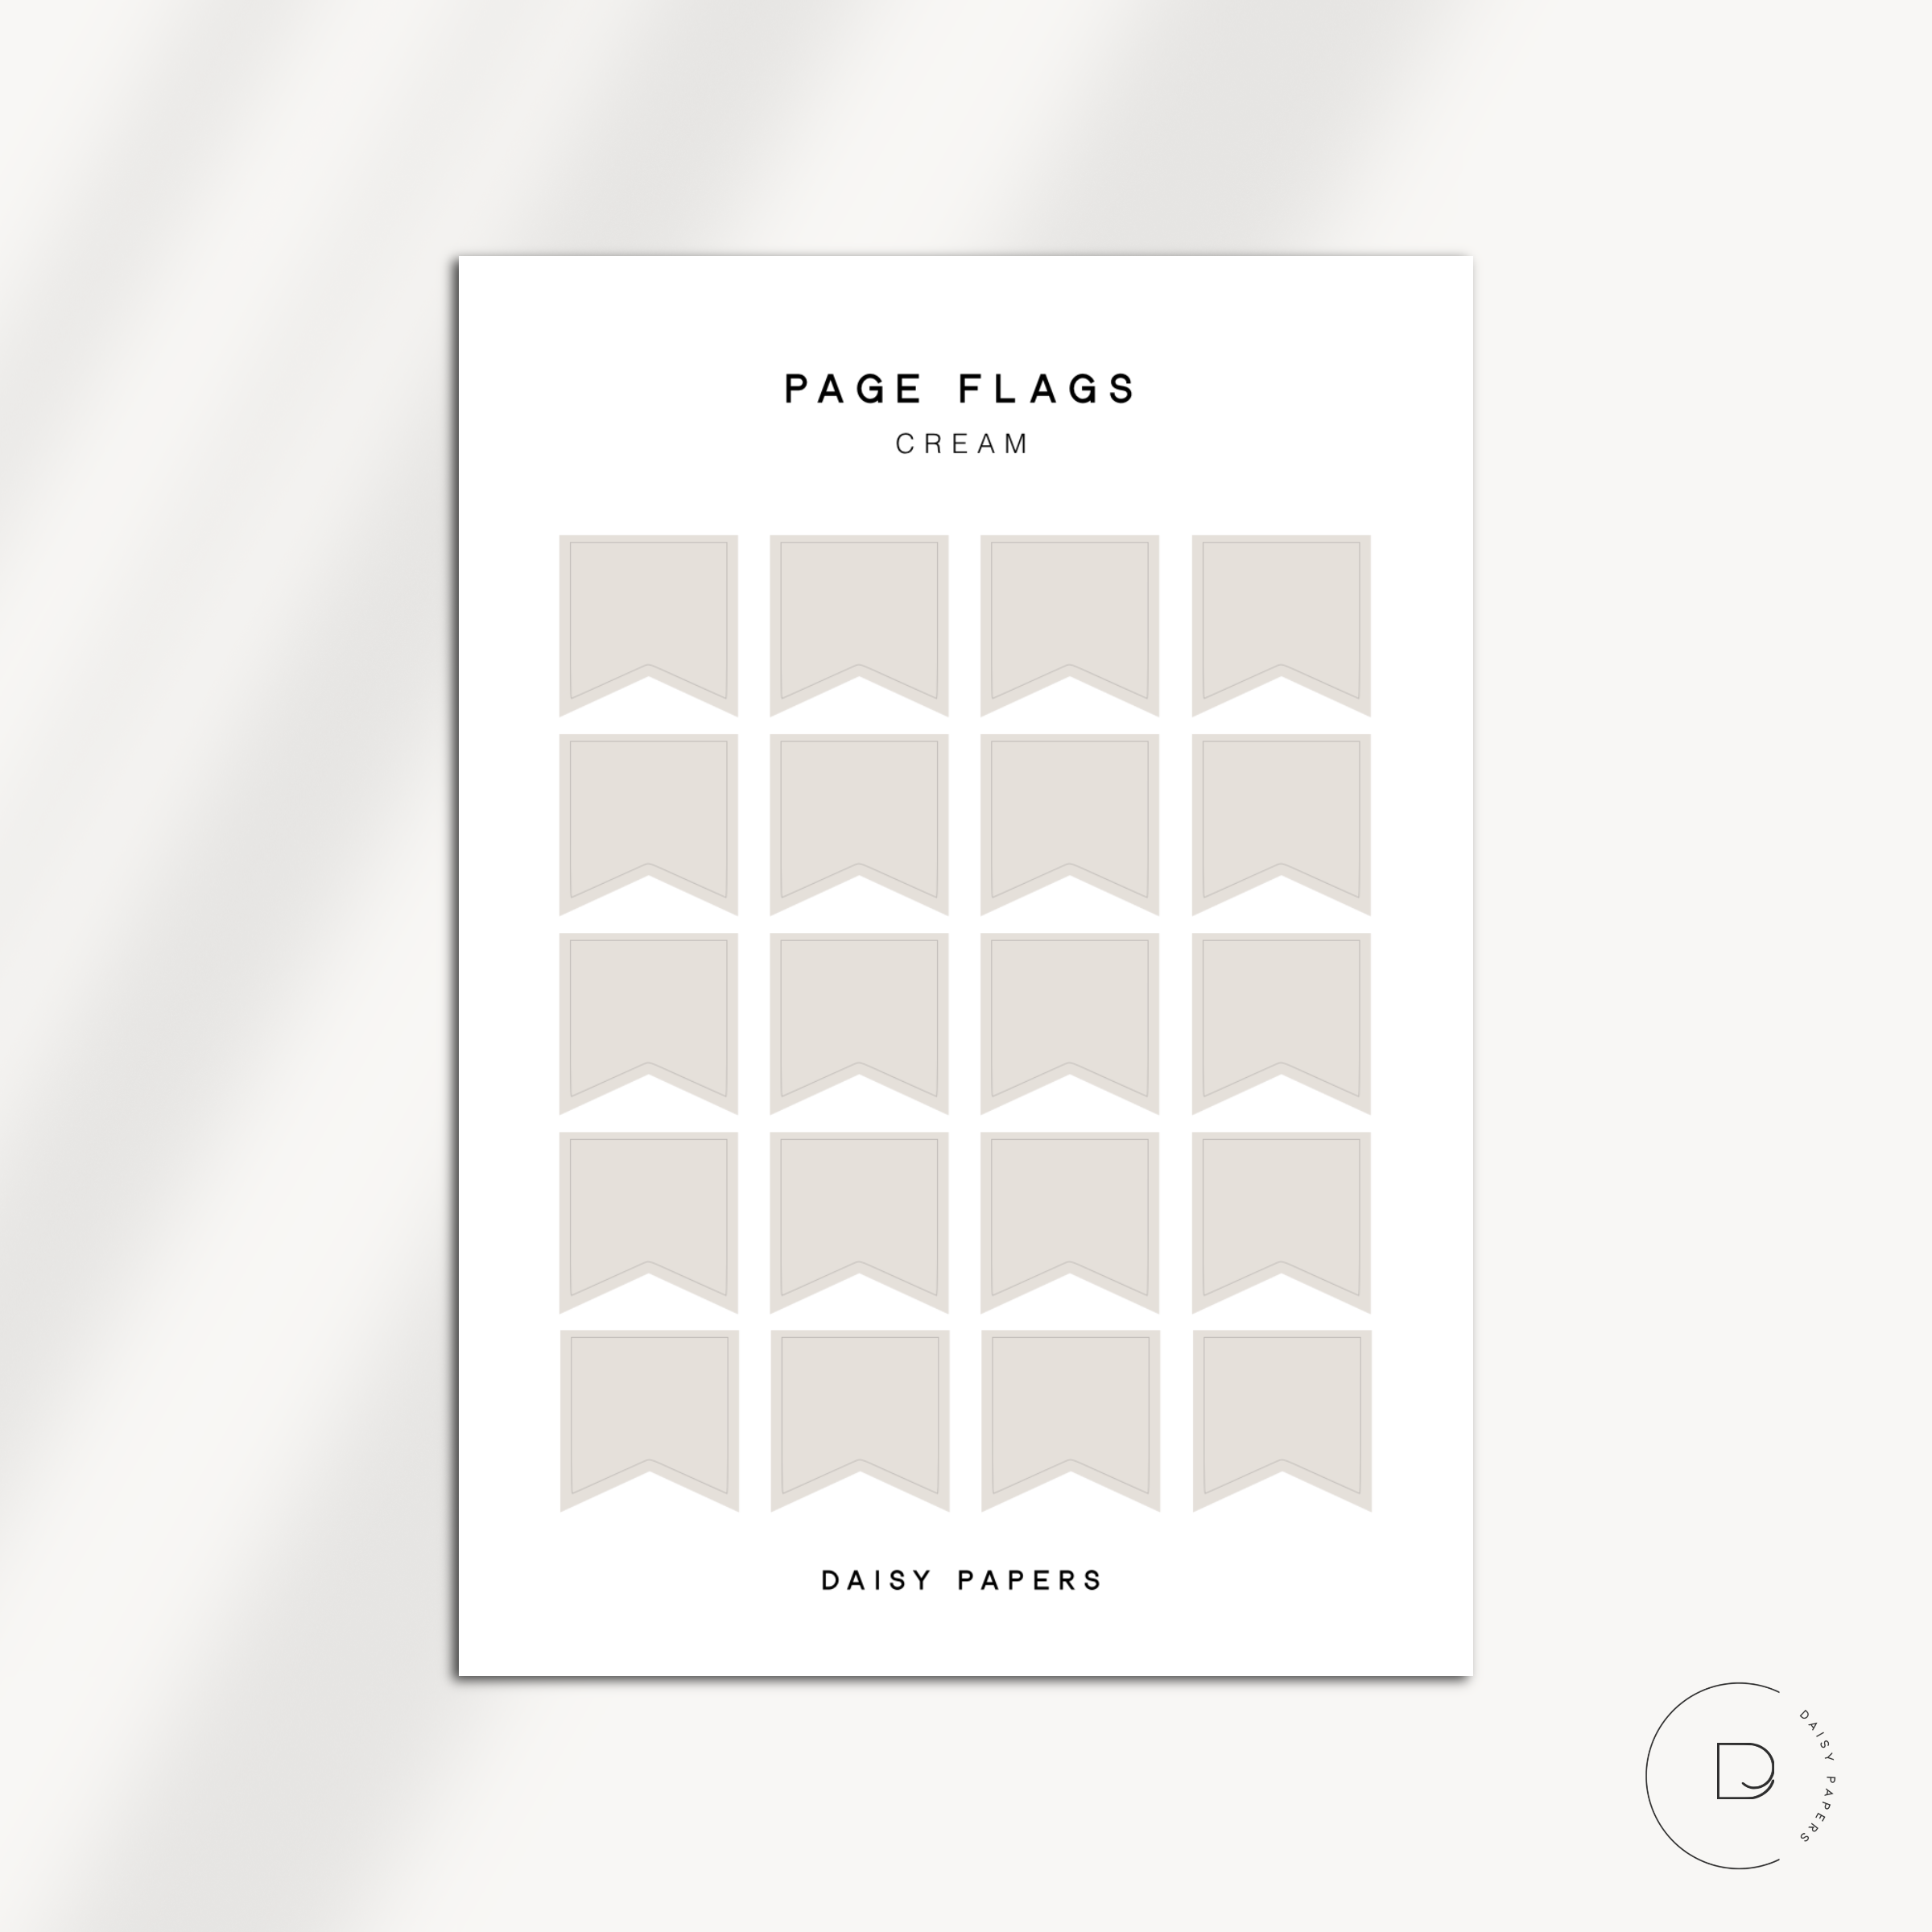 PAGE FLAGS